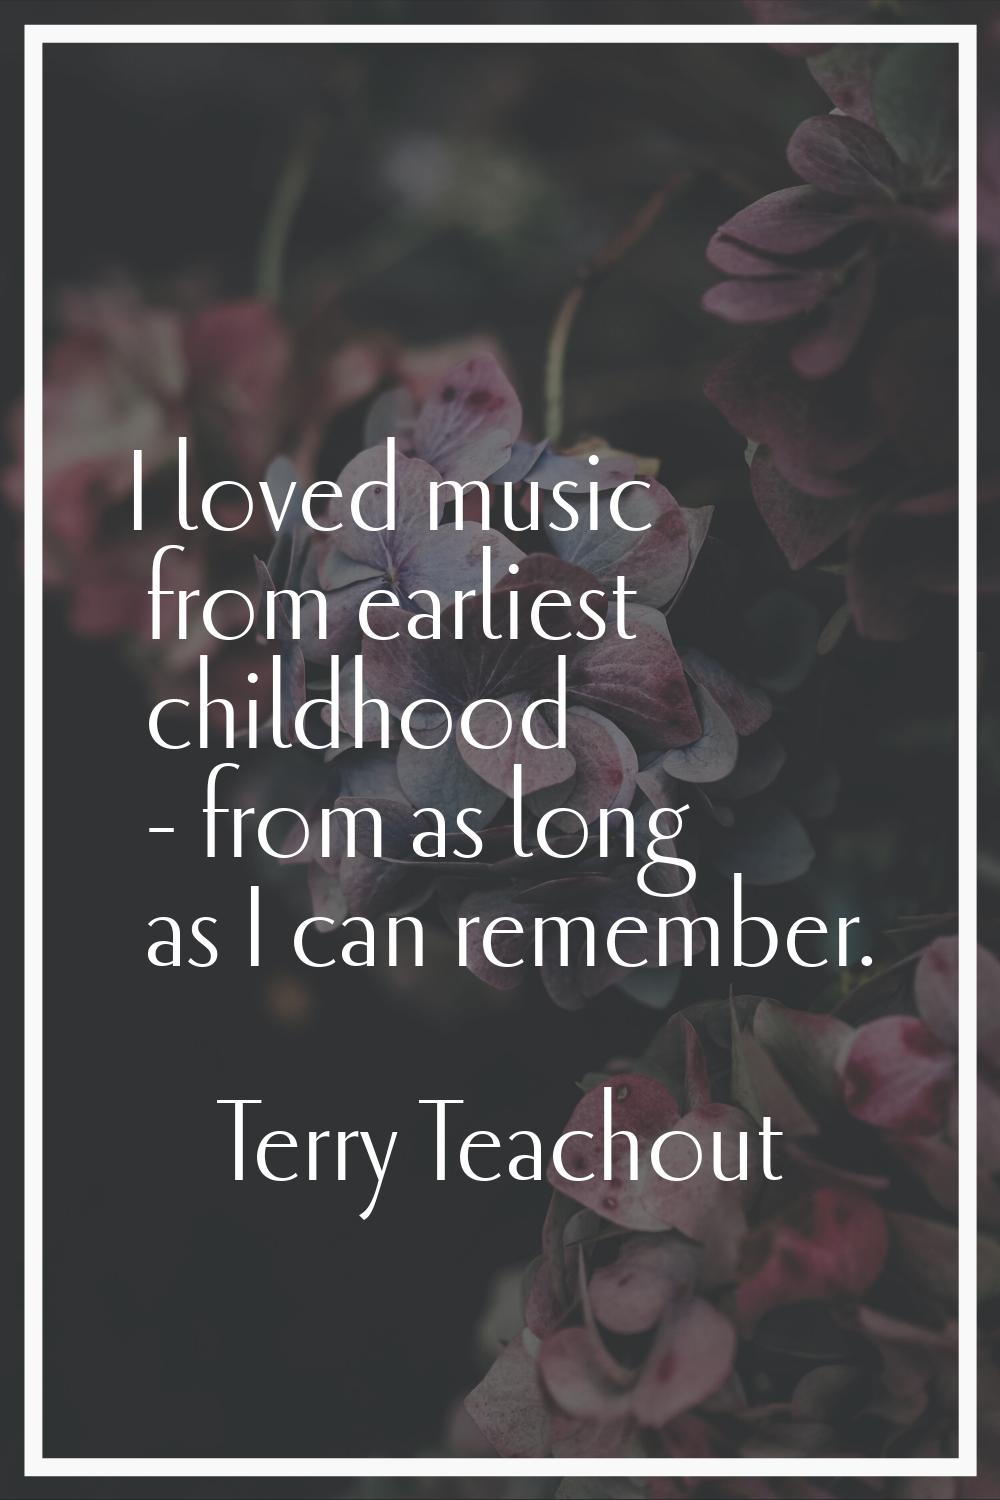 I loved music from earliest childhood - from as long as I can remember.